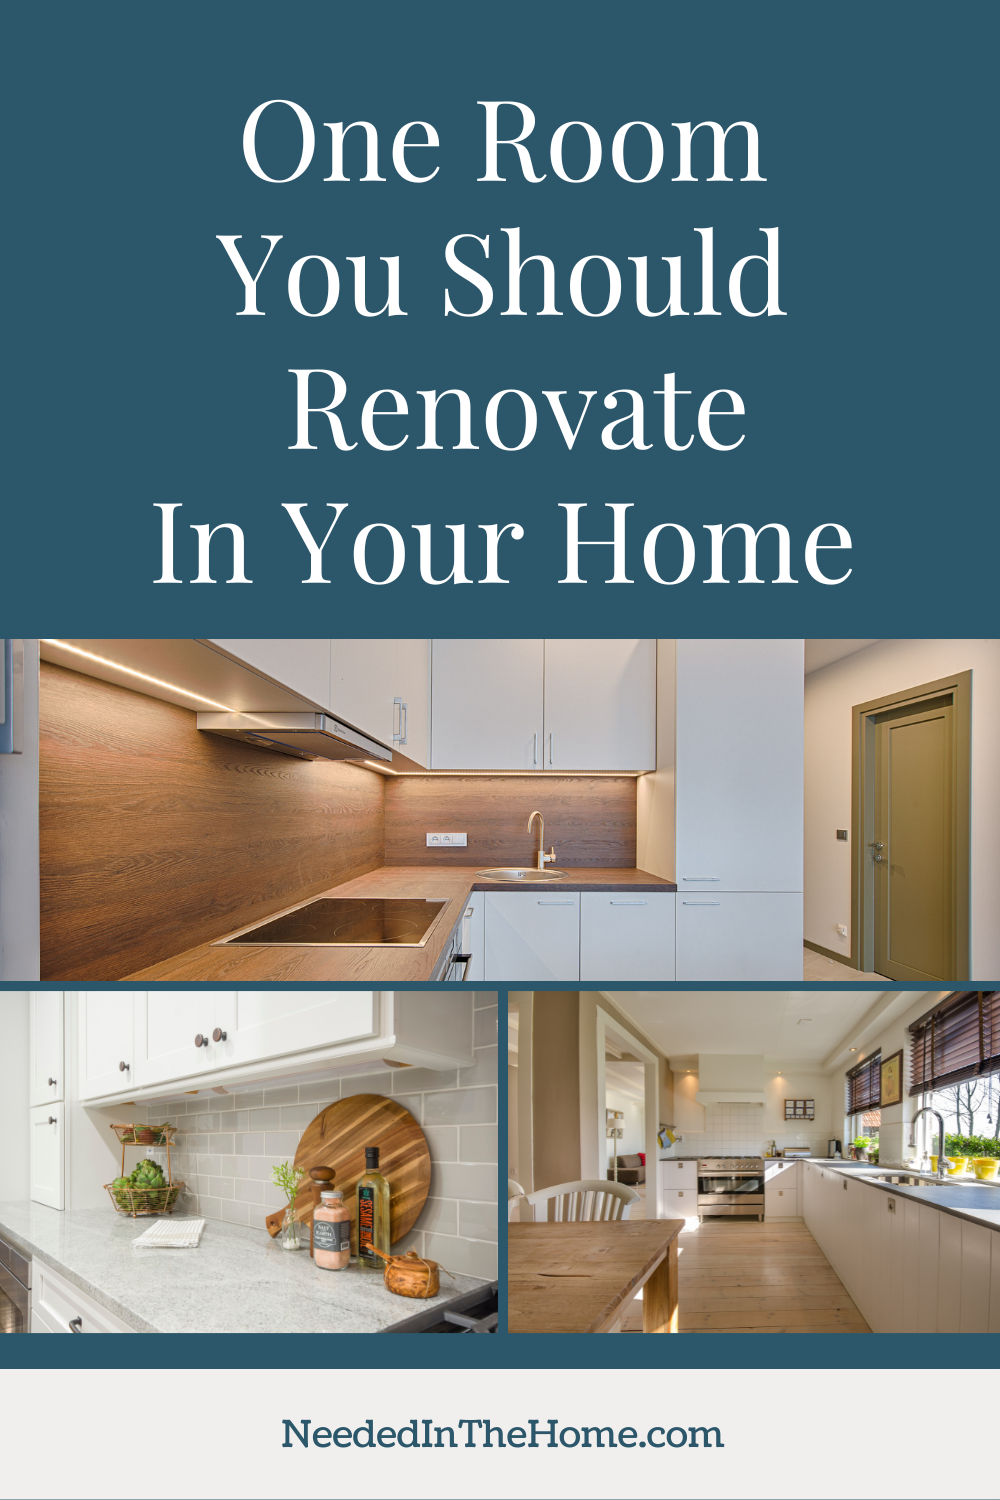 pinterest-pin-description one room you should renovate in your home remodeled kitchen sink stovetop counter flooring neededinthehome